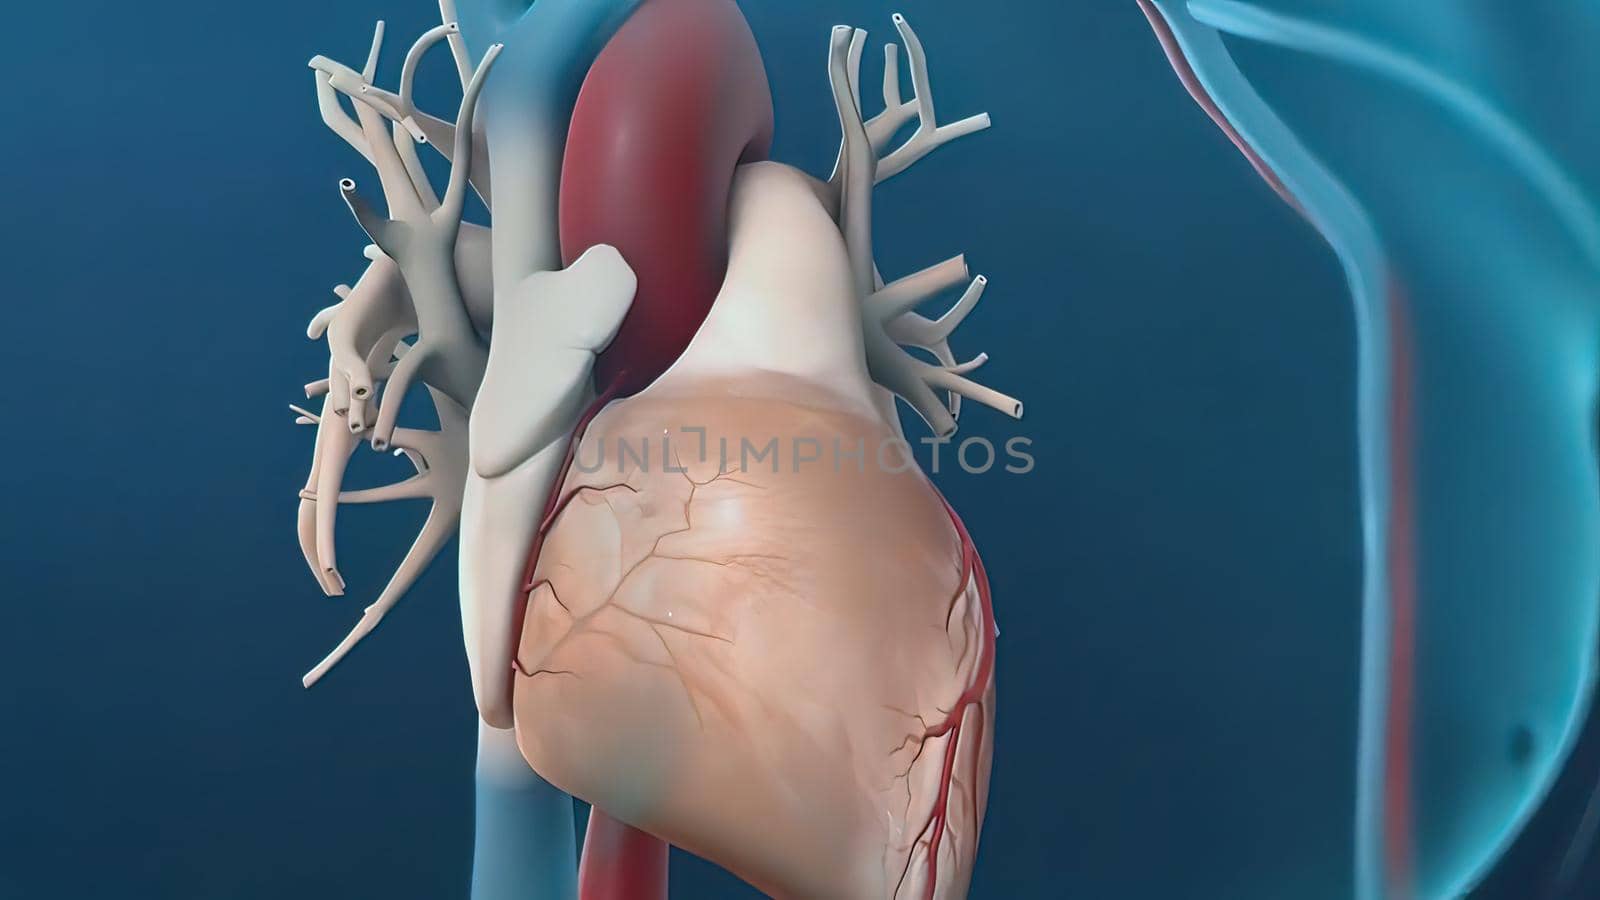 The term angioplasty means using a balloon to stretch open a narrowed by creativepic